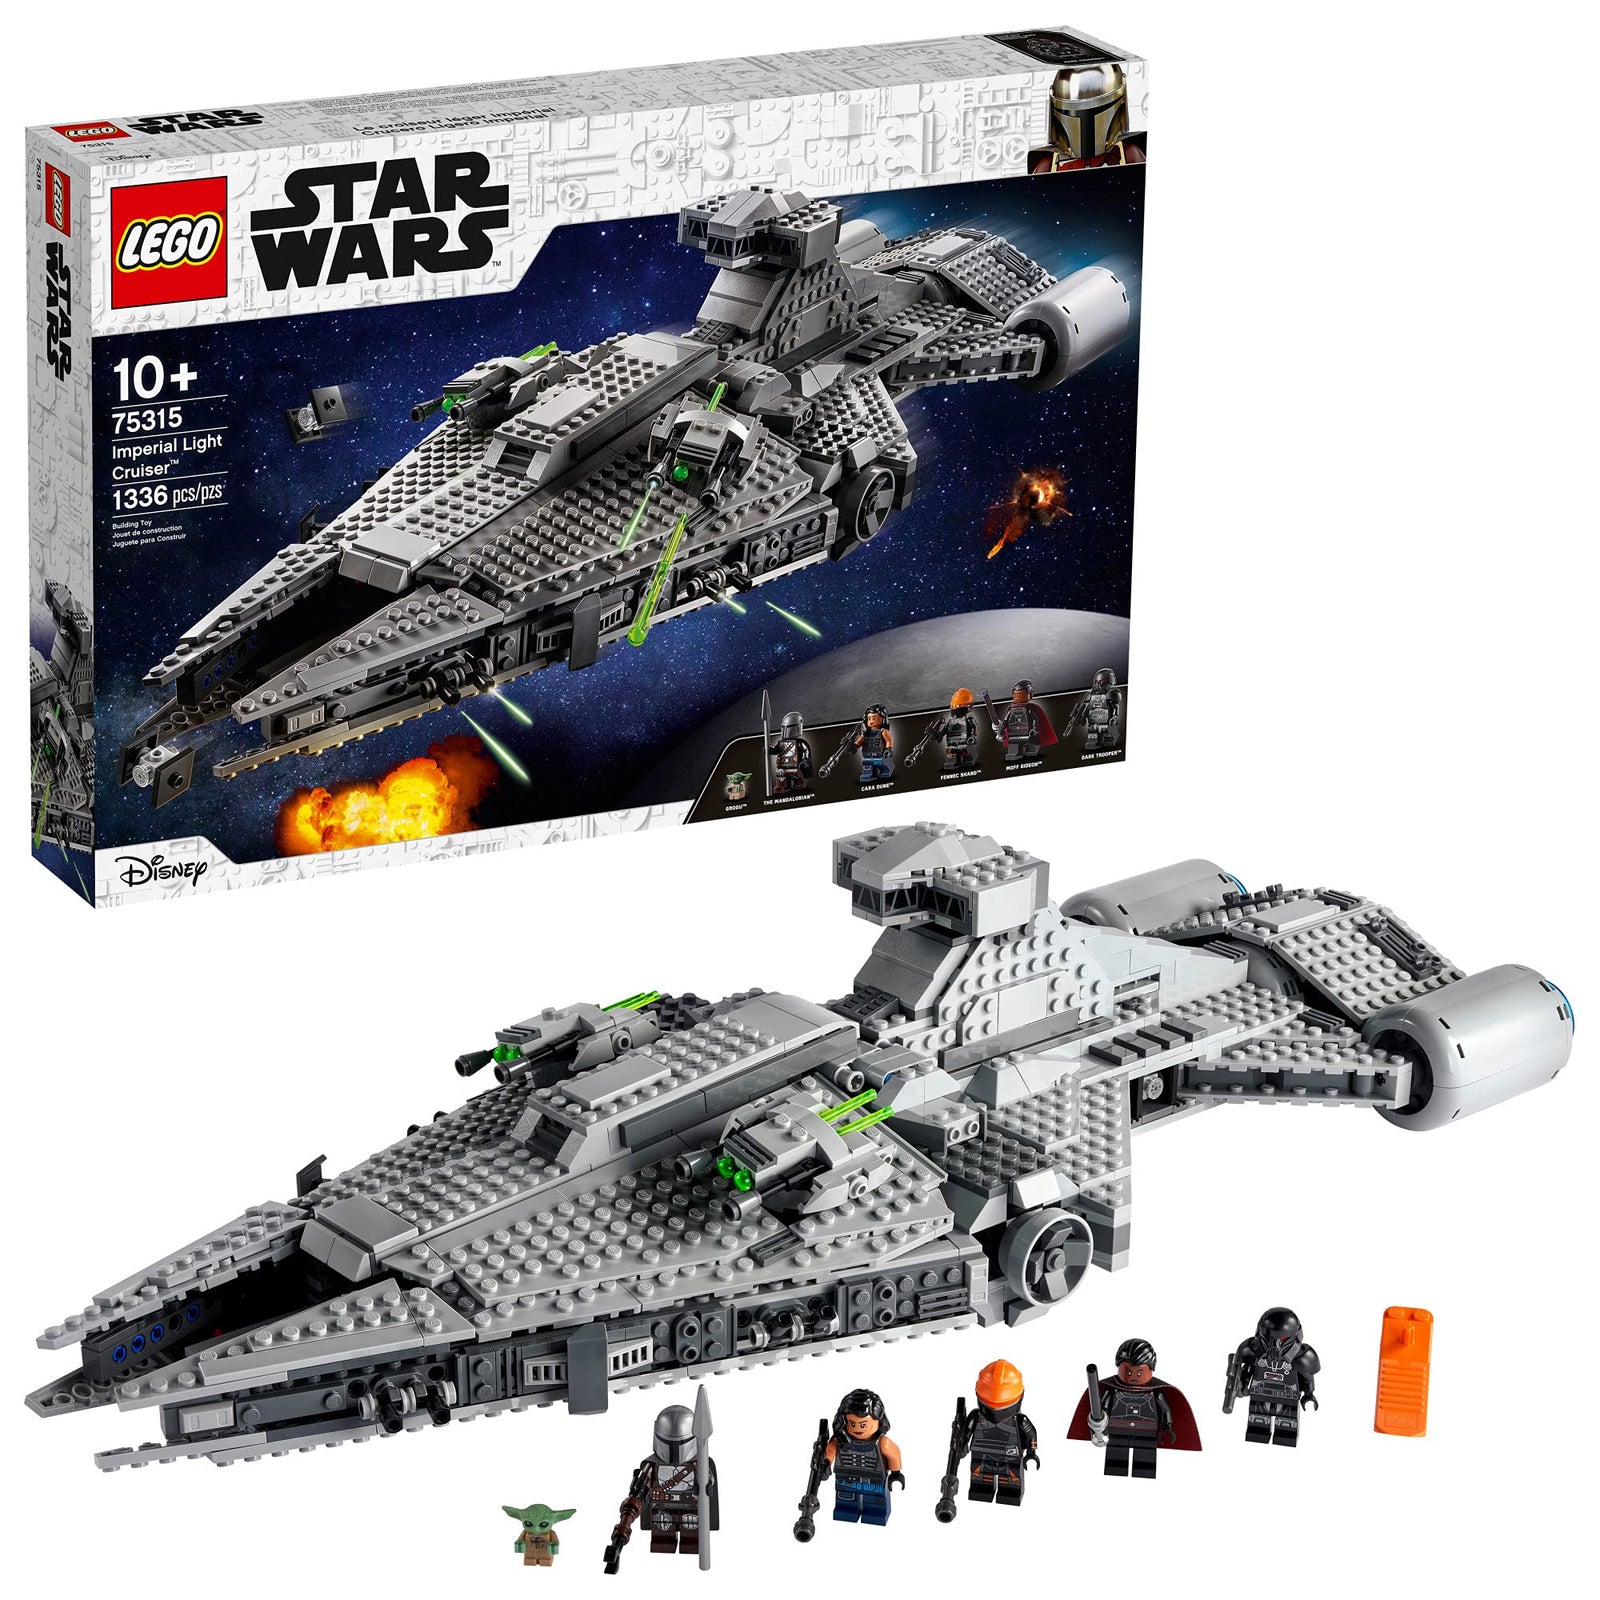 LEGO Star Wars Imperial Light Cruiser 75315 Awesome Toy Building Kit for Kids, Featuring 5 Minifigures; New 2021 (1,336 Pieces)